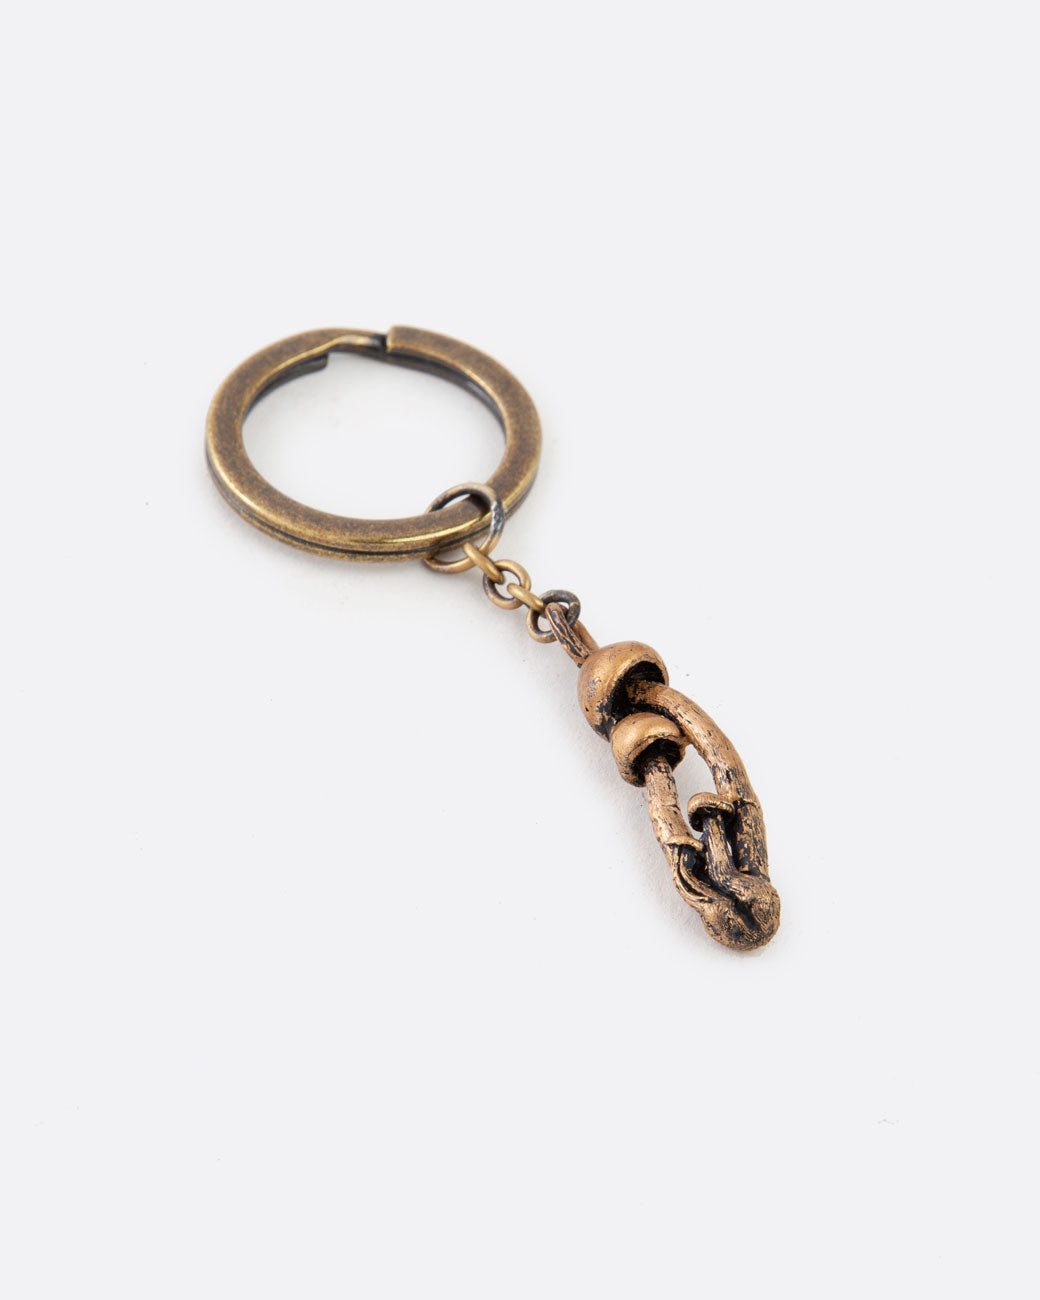 bronze mushroom keychain from above and angle